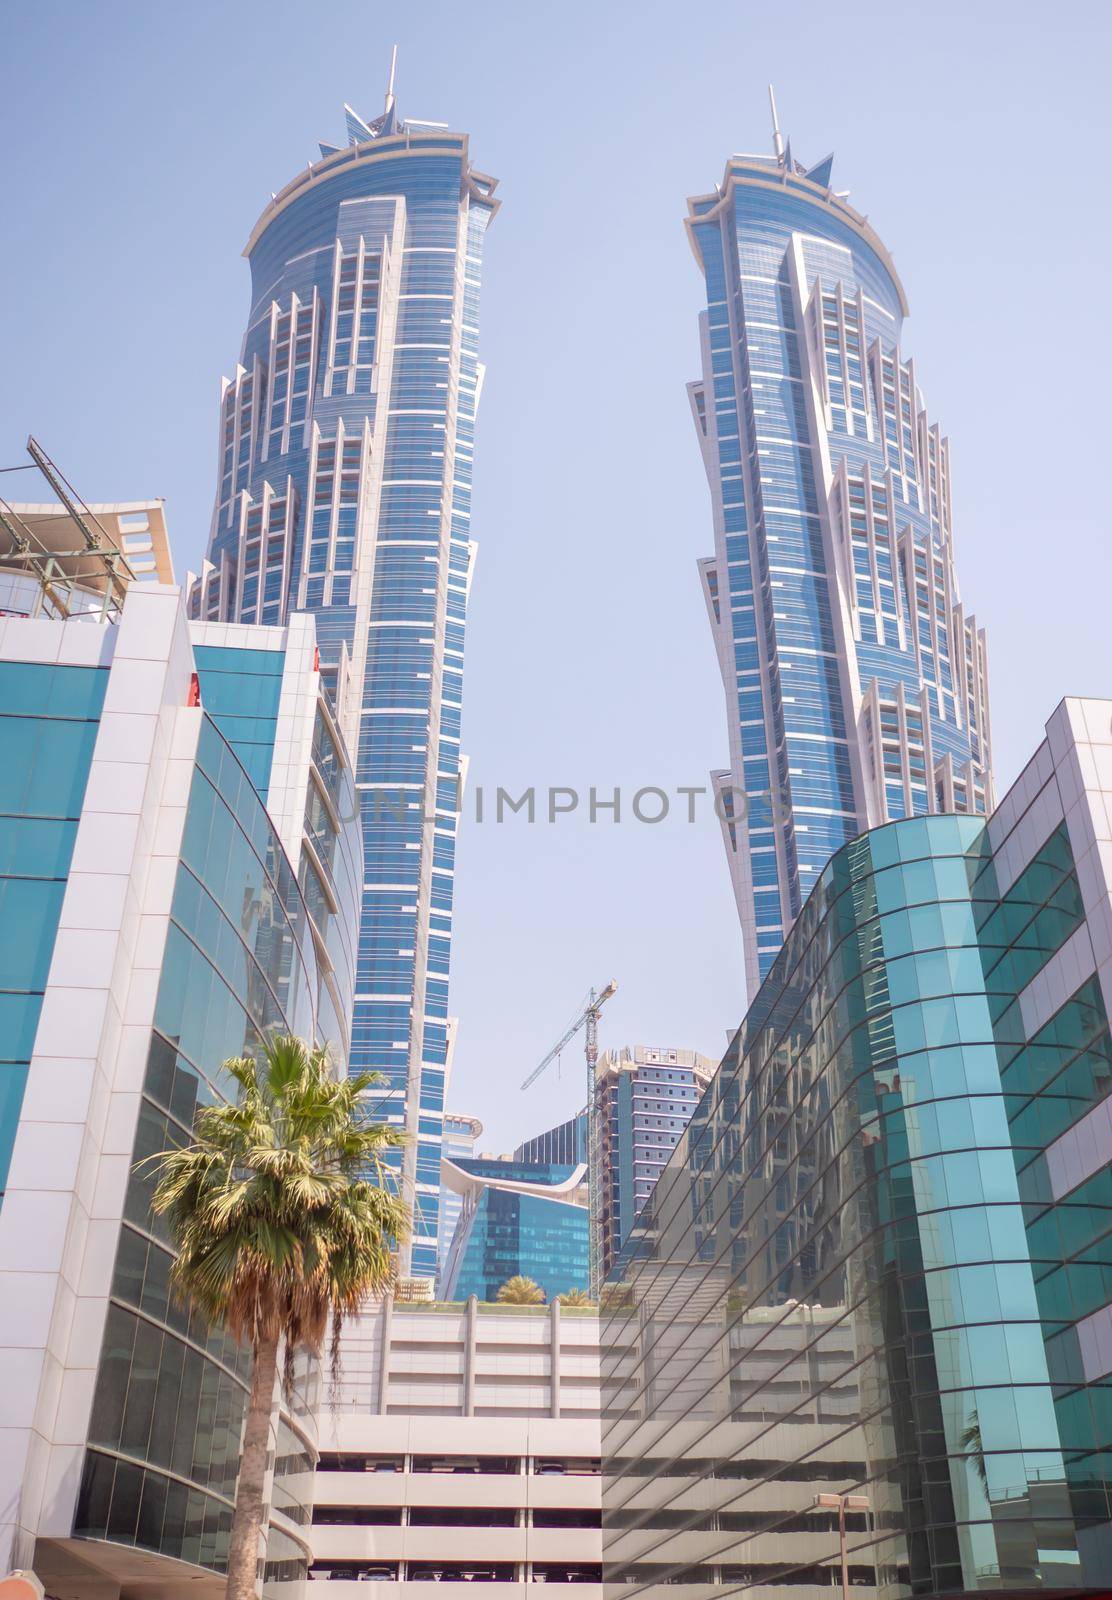 Dubai, UAE - May 15, 2018: Modern buildings in Dubai on a clear day by DovidPro